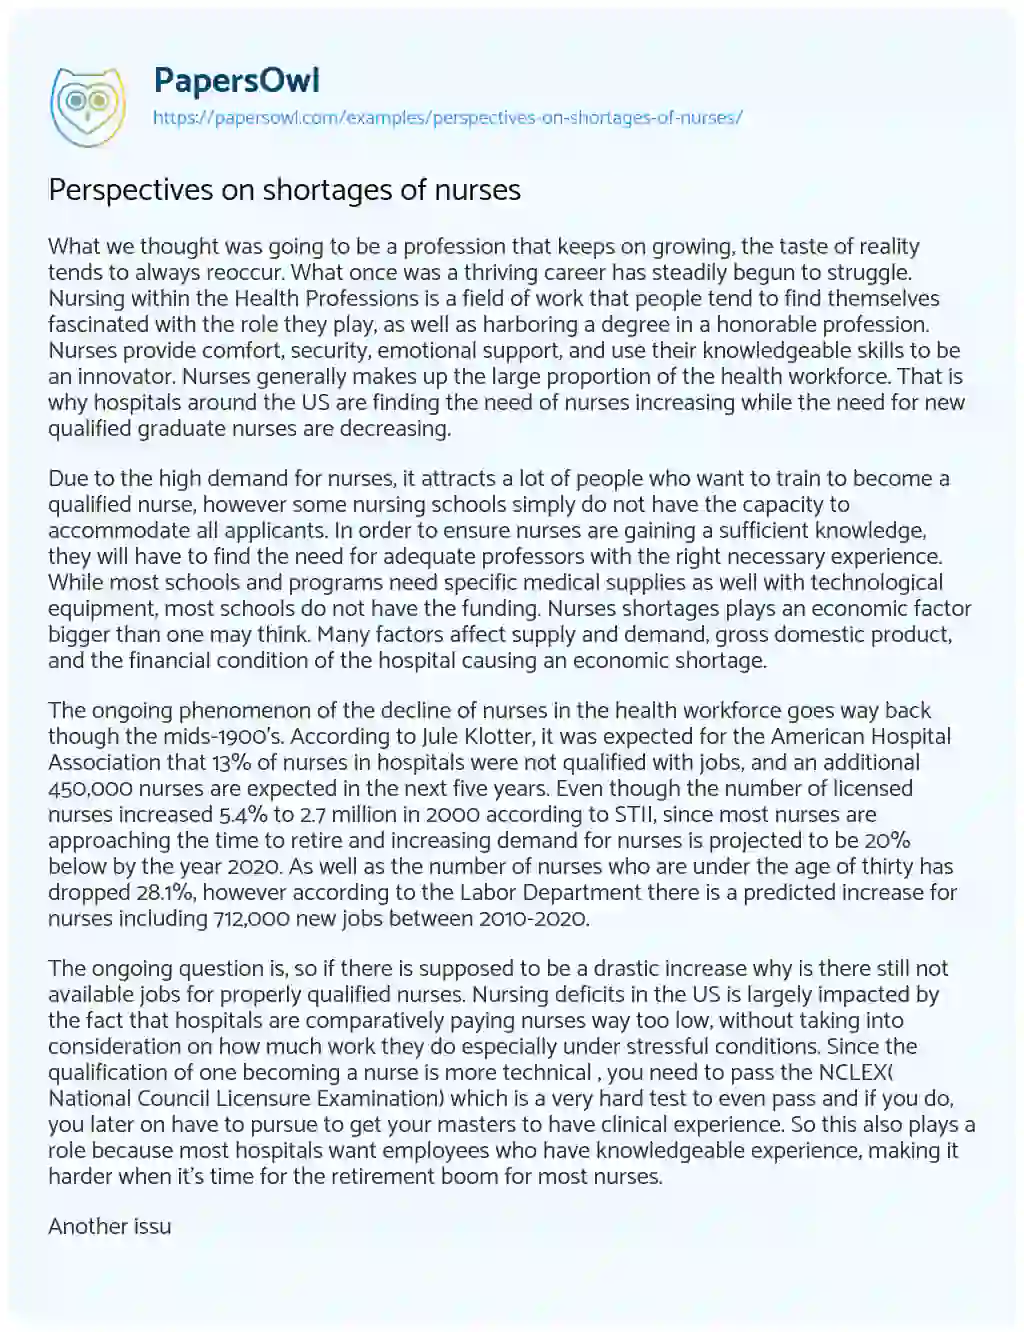 Perspectives on Shortages of Nurses  essay